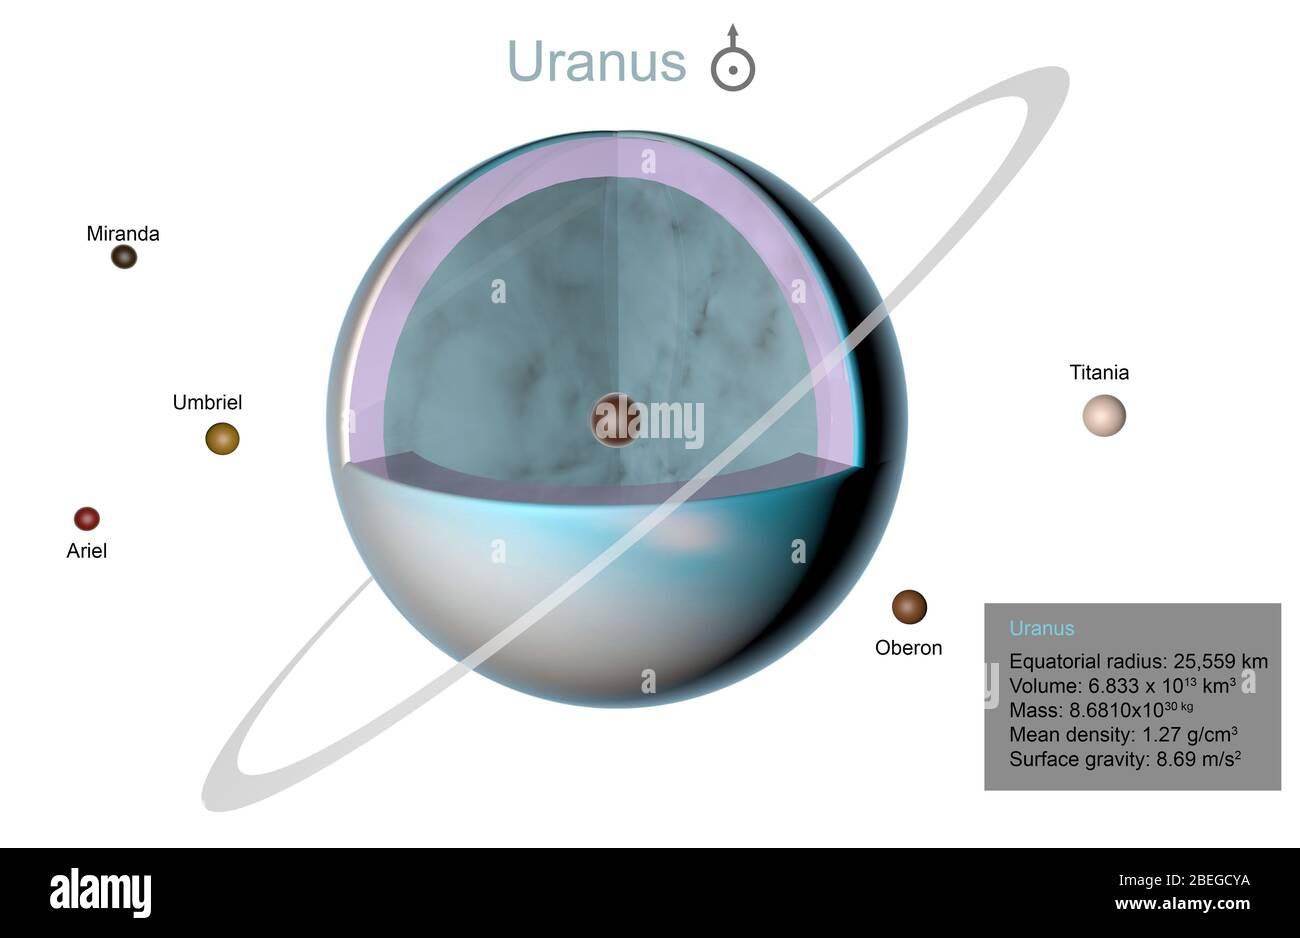 Illustration of Uranus in cutaway view, revealing its structure. Also shown are the planet’s five main satellites: Miranda, Umbriel, Ariel, Titania and Oberon. Stock Photo